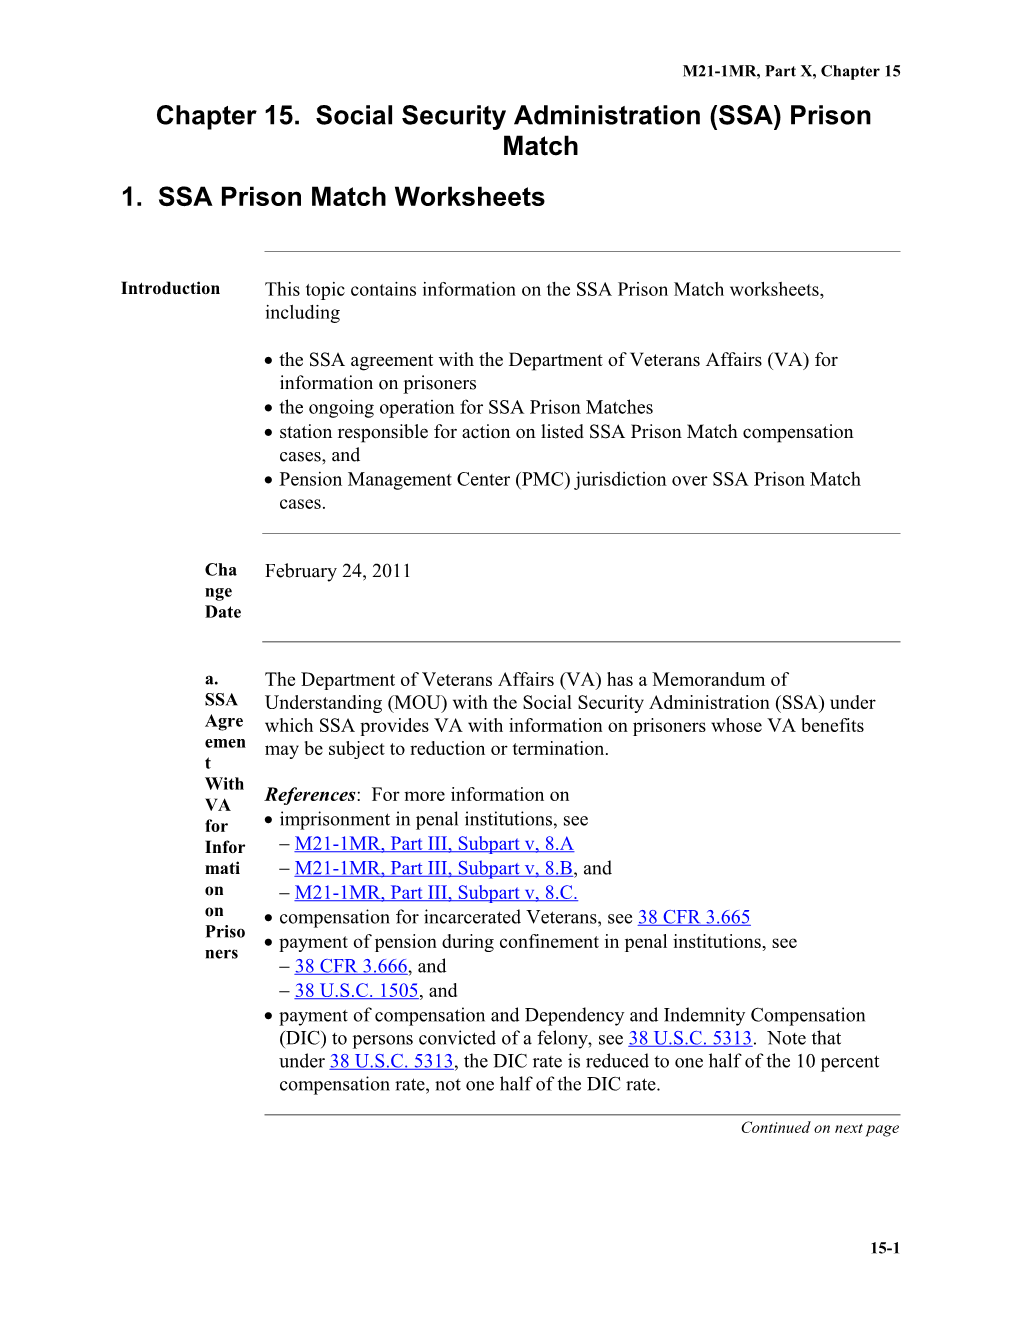 Chapter 15. Social Security Administration (SSA) Prison Match